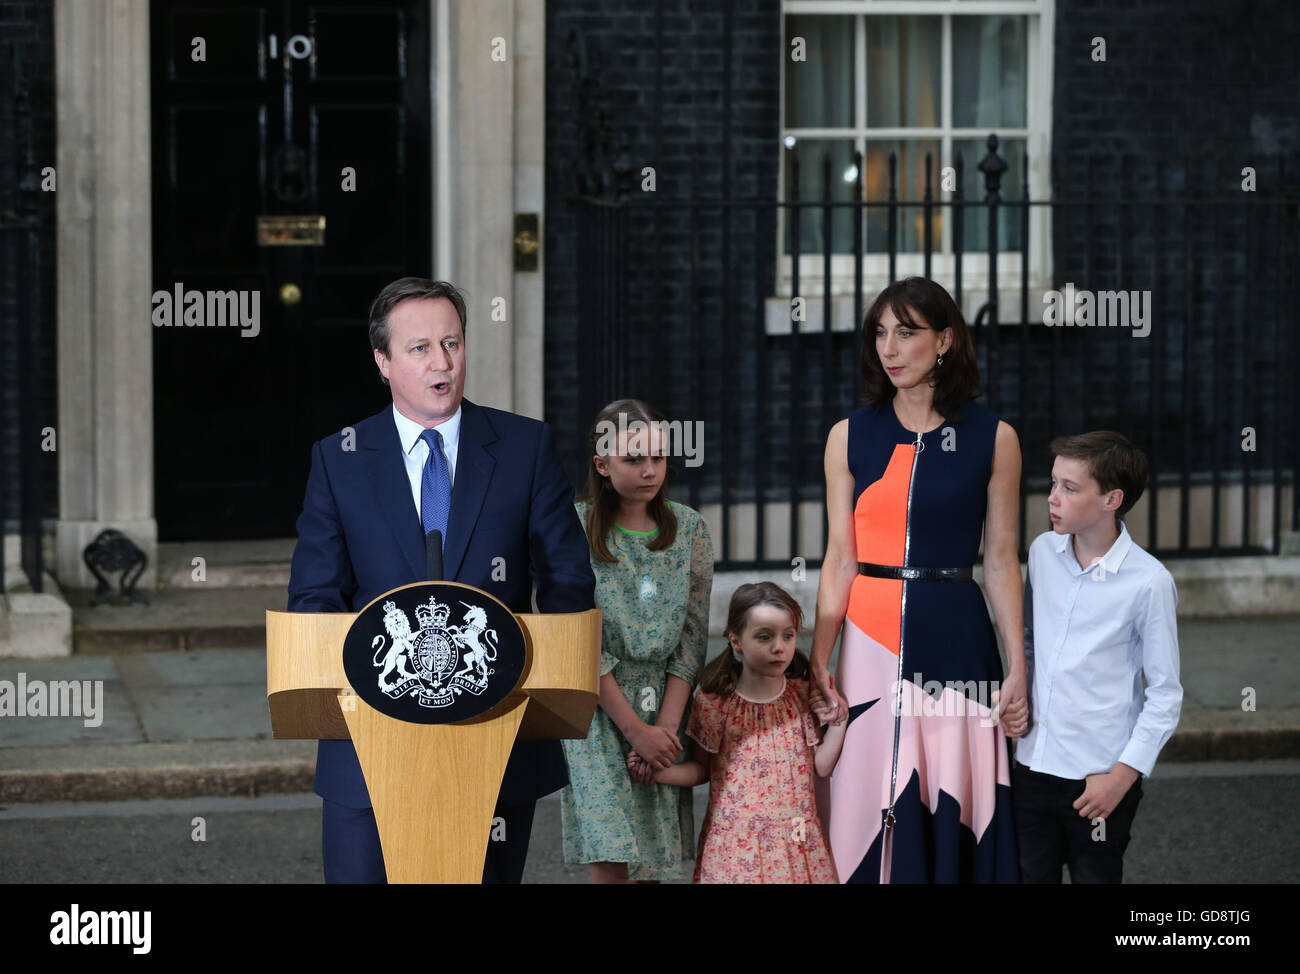 London, UK. 13th July, 2016. British outgoing Prime Minister David Cameron(1st L) gives a speech with his family before leaving 10 Downing Street in London, Britain on July 13, 2016. Cameron bid farewell to 10 Downing Street and headed to Buckingham Palace to offer his resignation to Queen Elizabeth II on Wednesday afternoon. Credit:  Han Yan/Xinhua/Alamy Live News Stock Photo